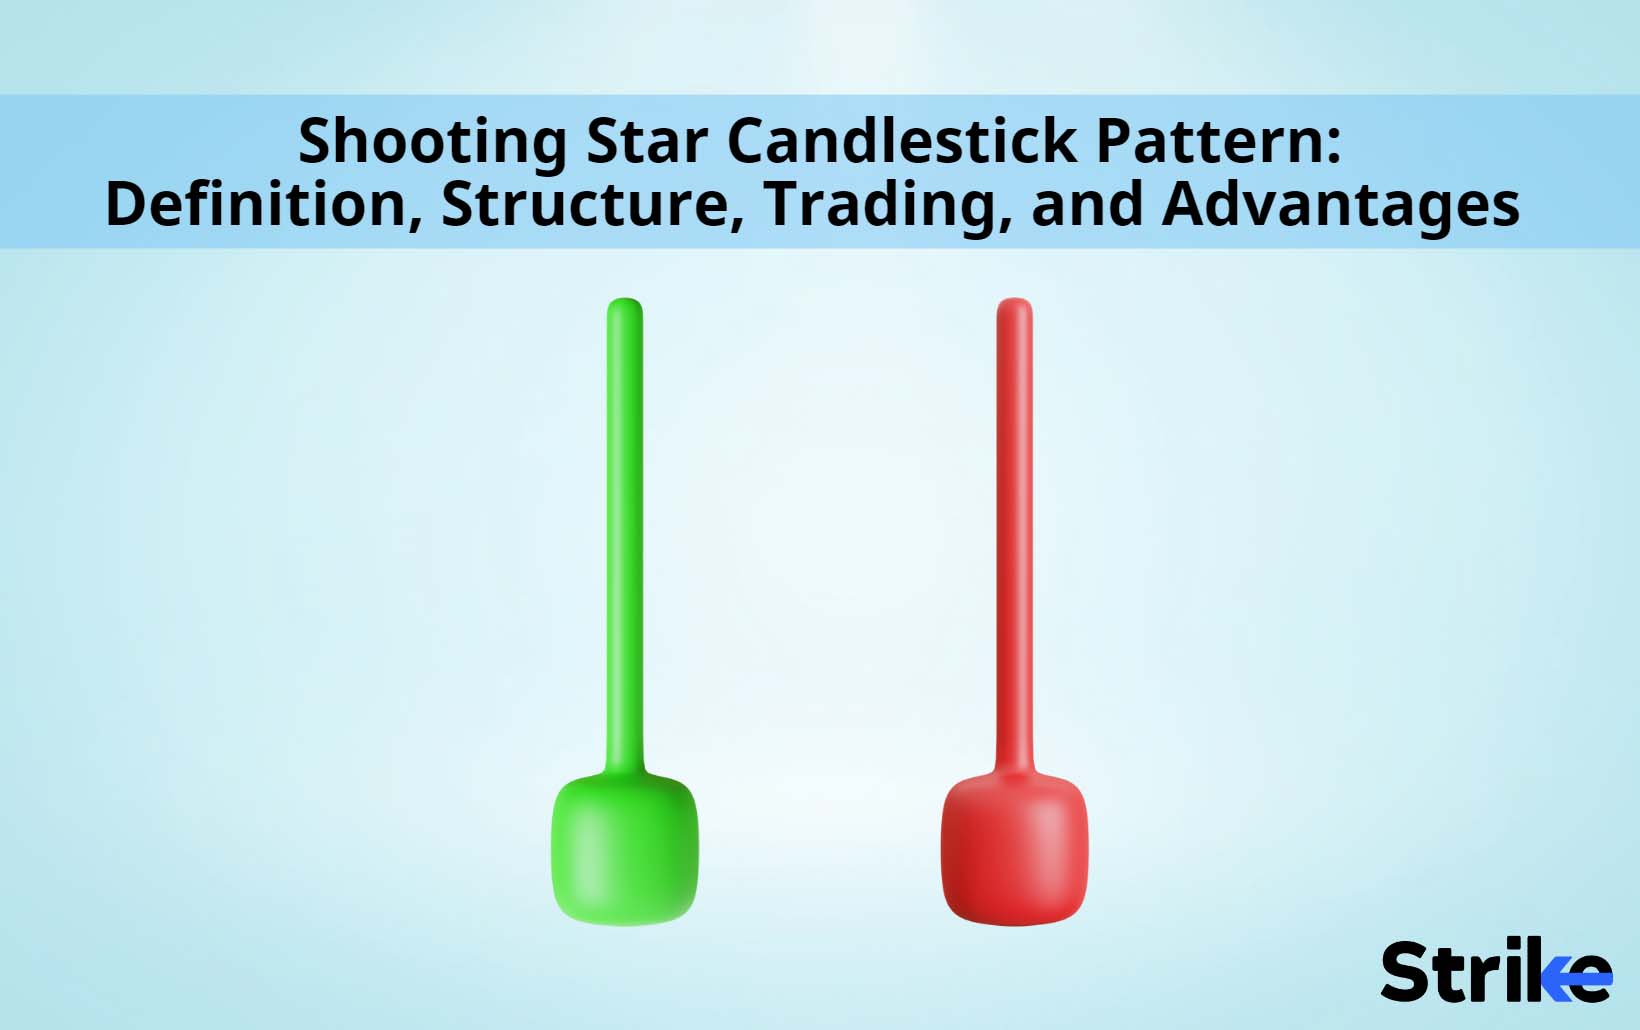 Shooting Star Candlestick Pattern: Definition, Structure, Trading, and Advantages